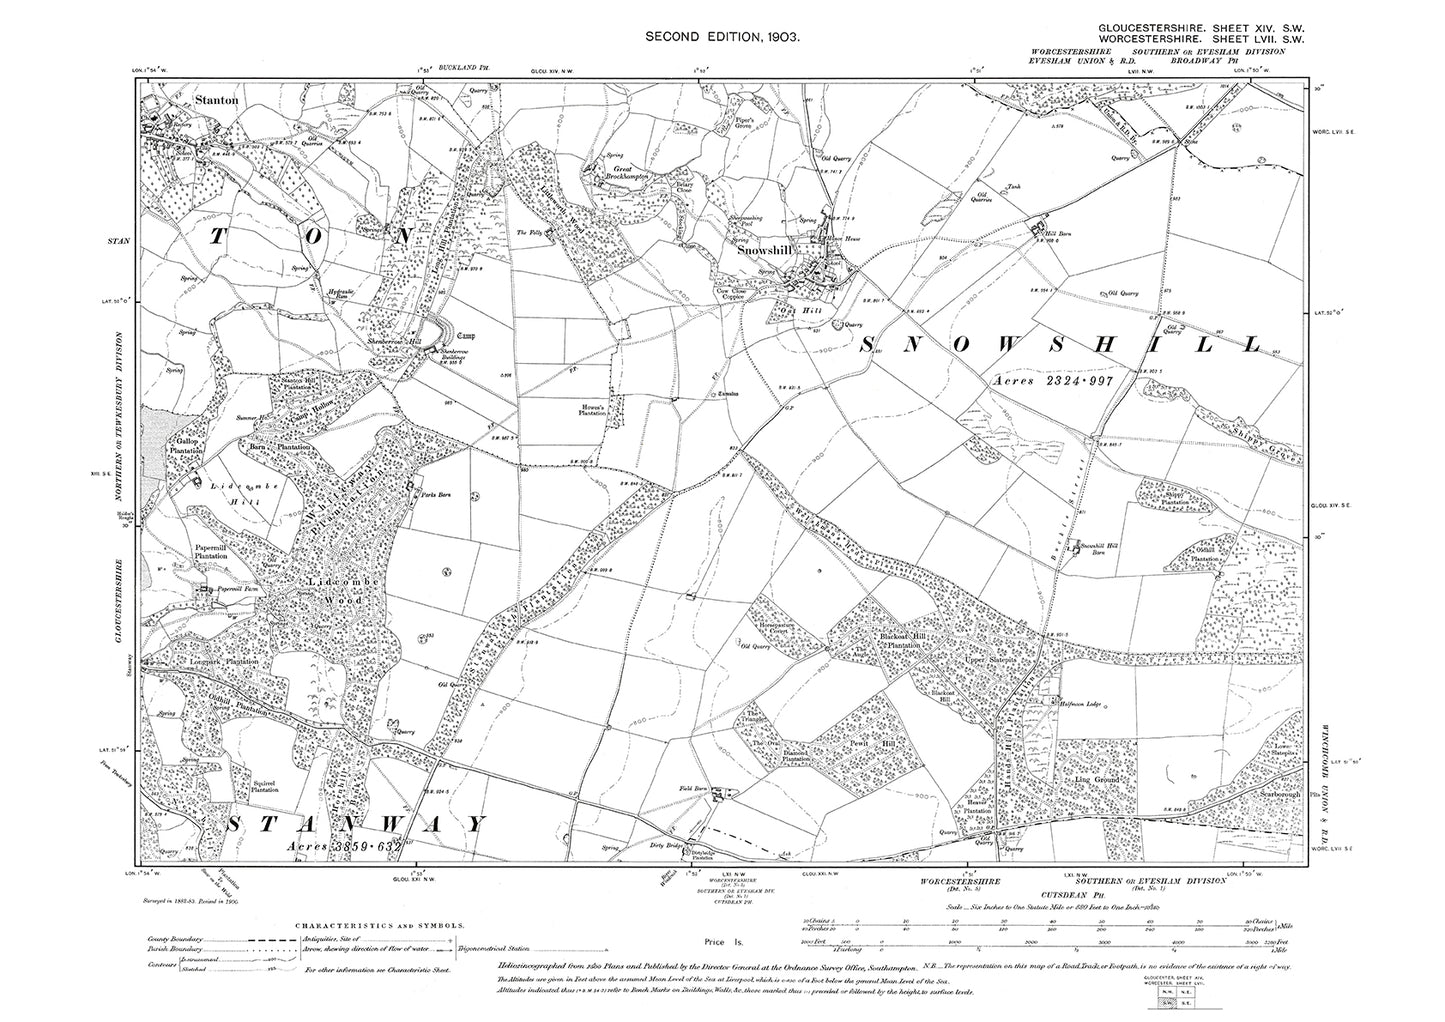 Old OS map dated 1903, showing Stanton (east), Snowshill in Gloucestershire - 14SW